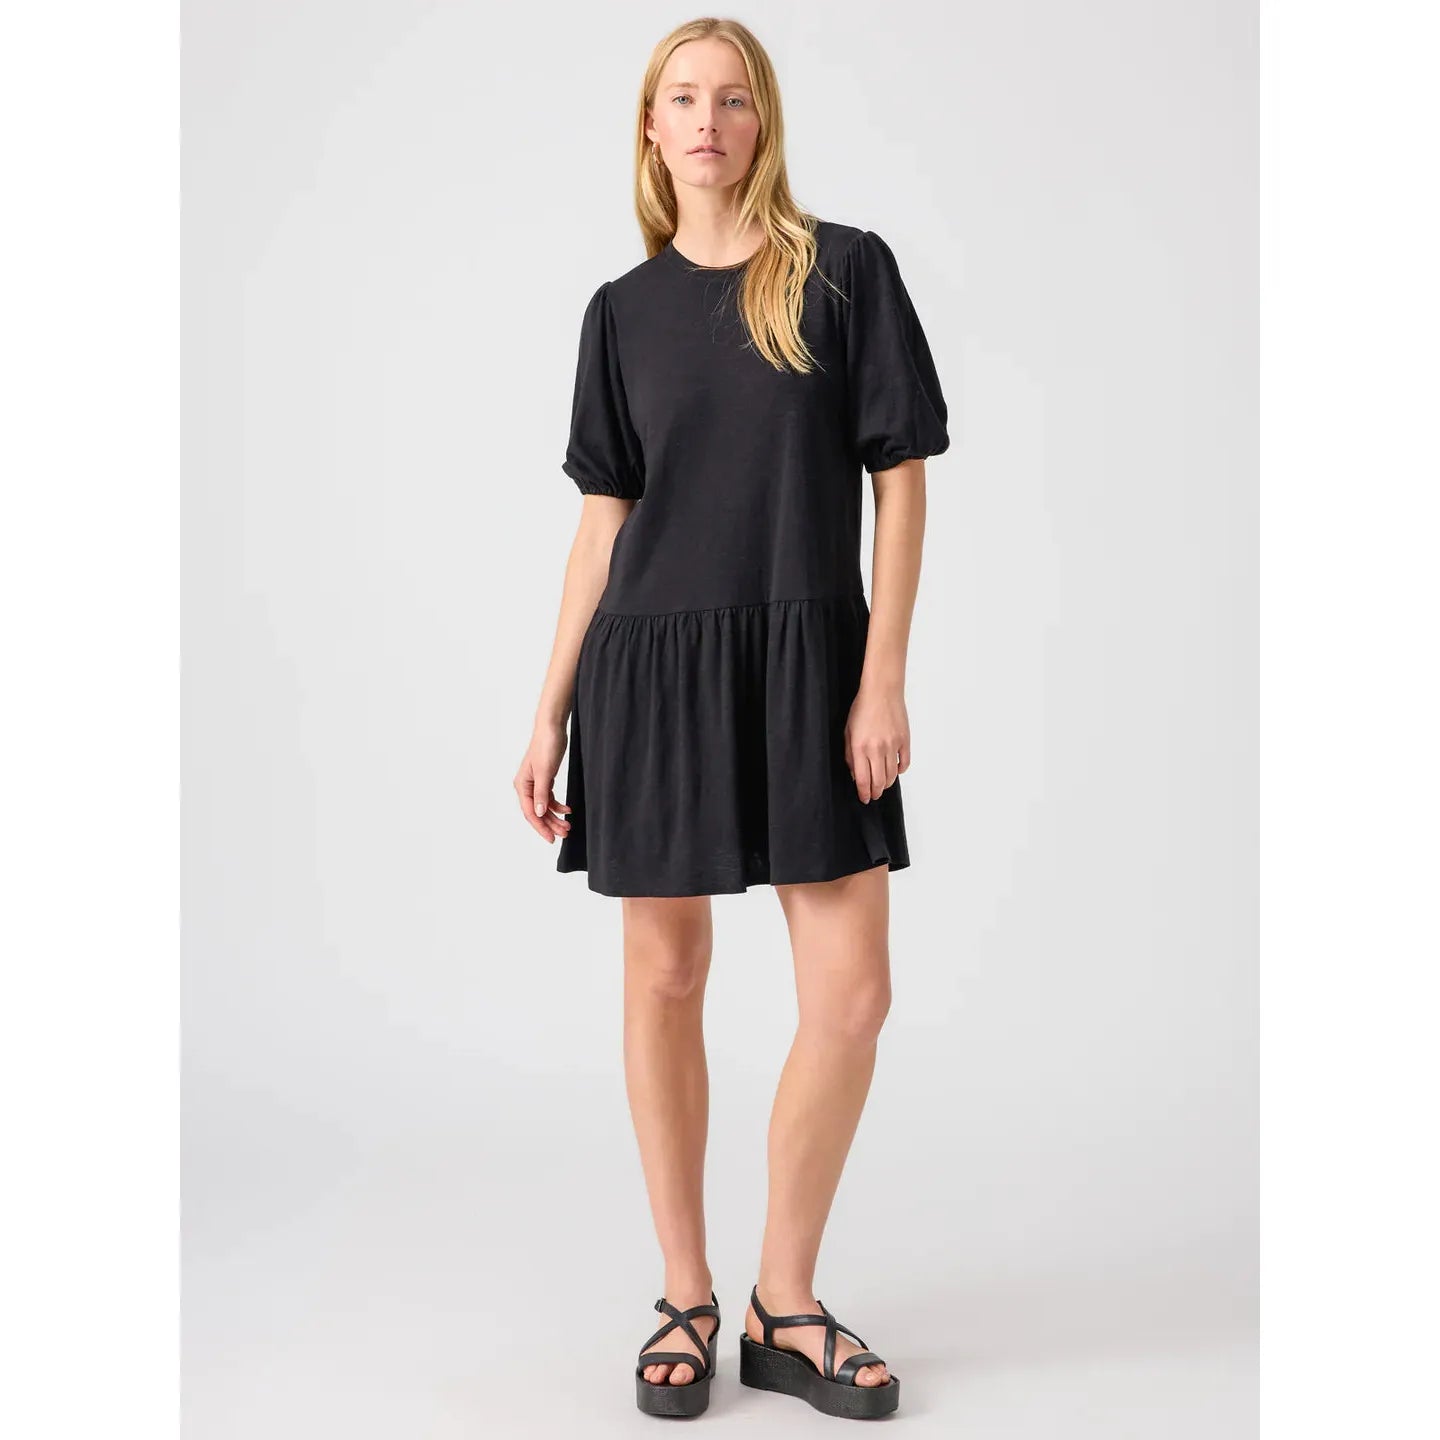 Sanctuary - Only Way Knit Dress in Black